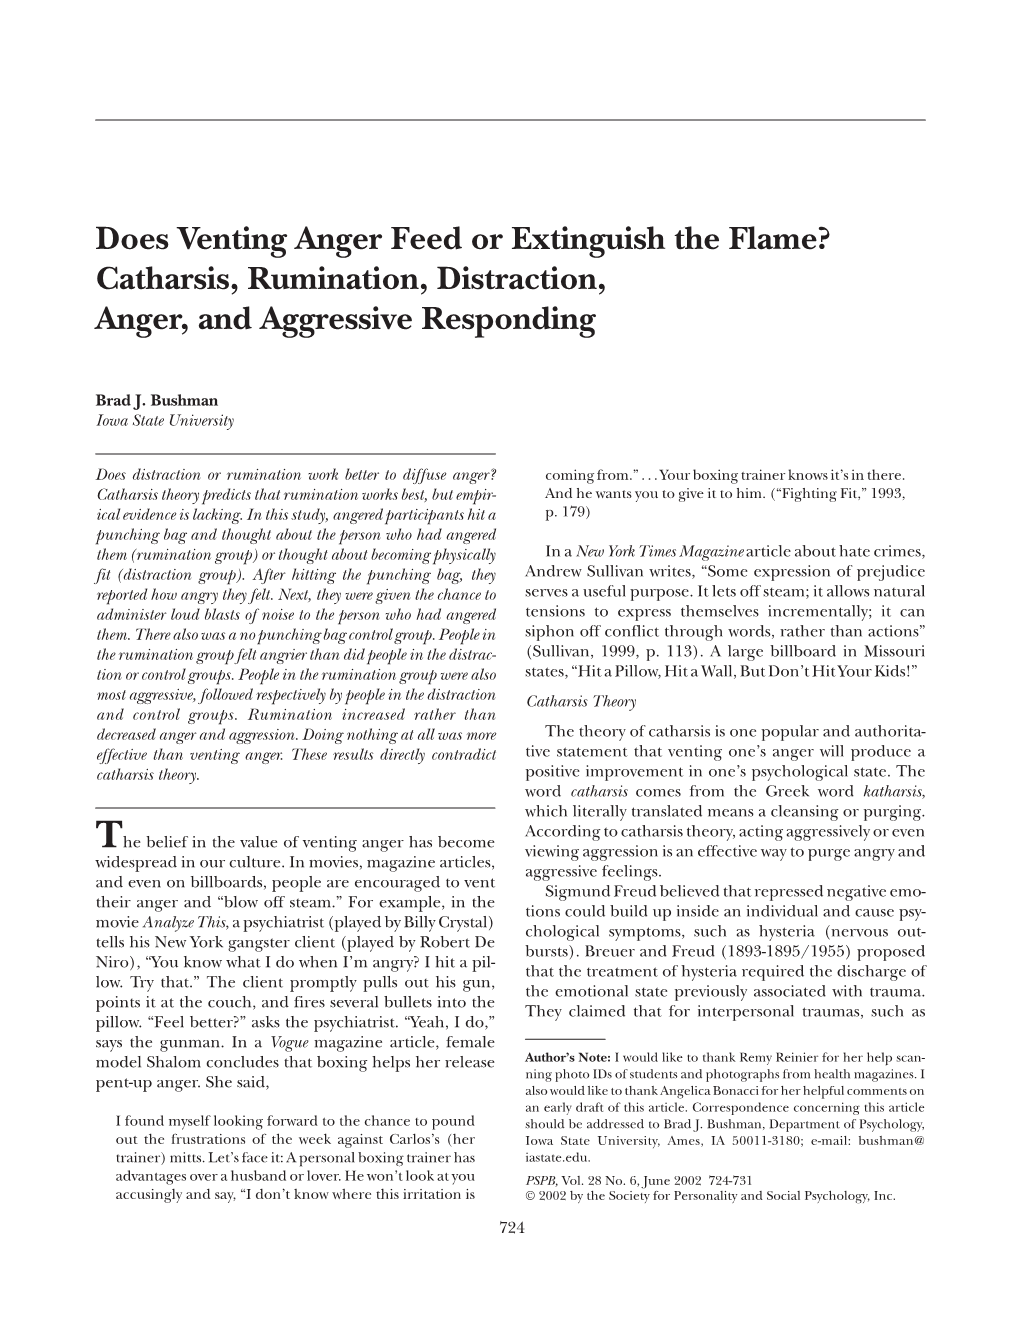 Does Venting Anger Feed Or Extinguish the Flame? Catharsis, Rumination, Distraction, Anger, and Aggressive Responding